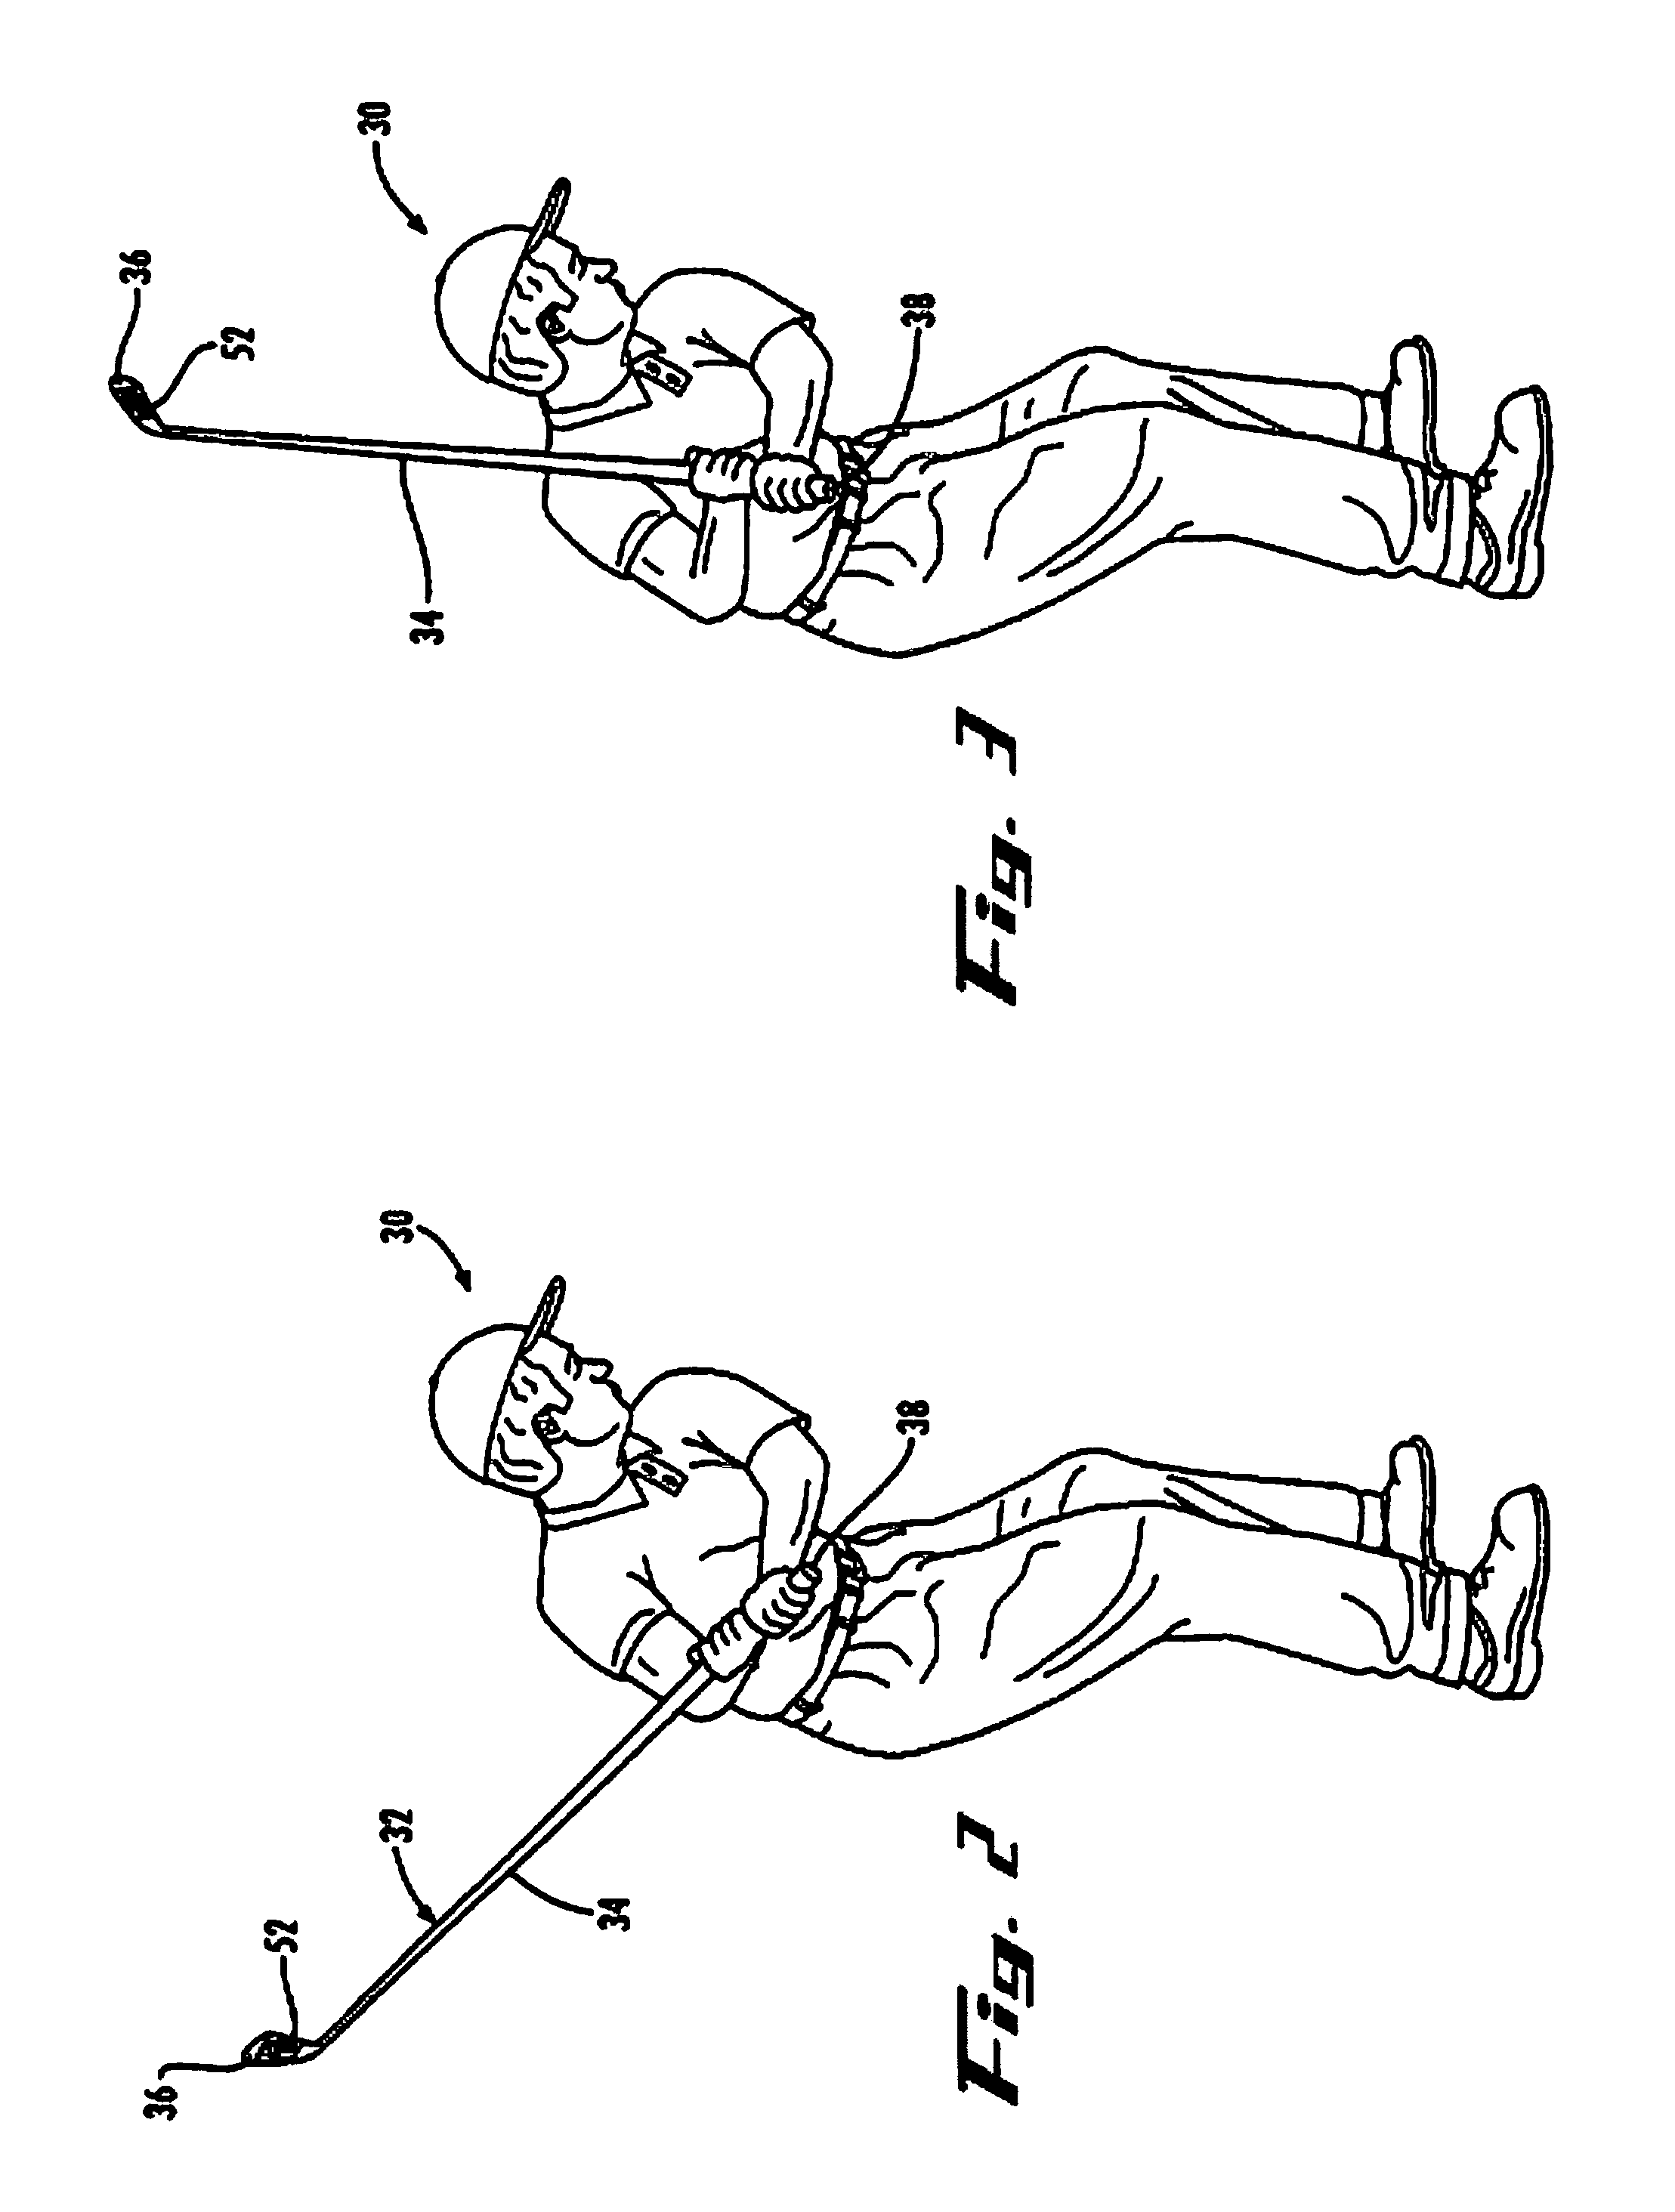 Multi-Rotor Apparatus and Method for Motion Sculpting